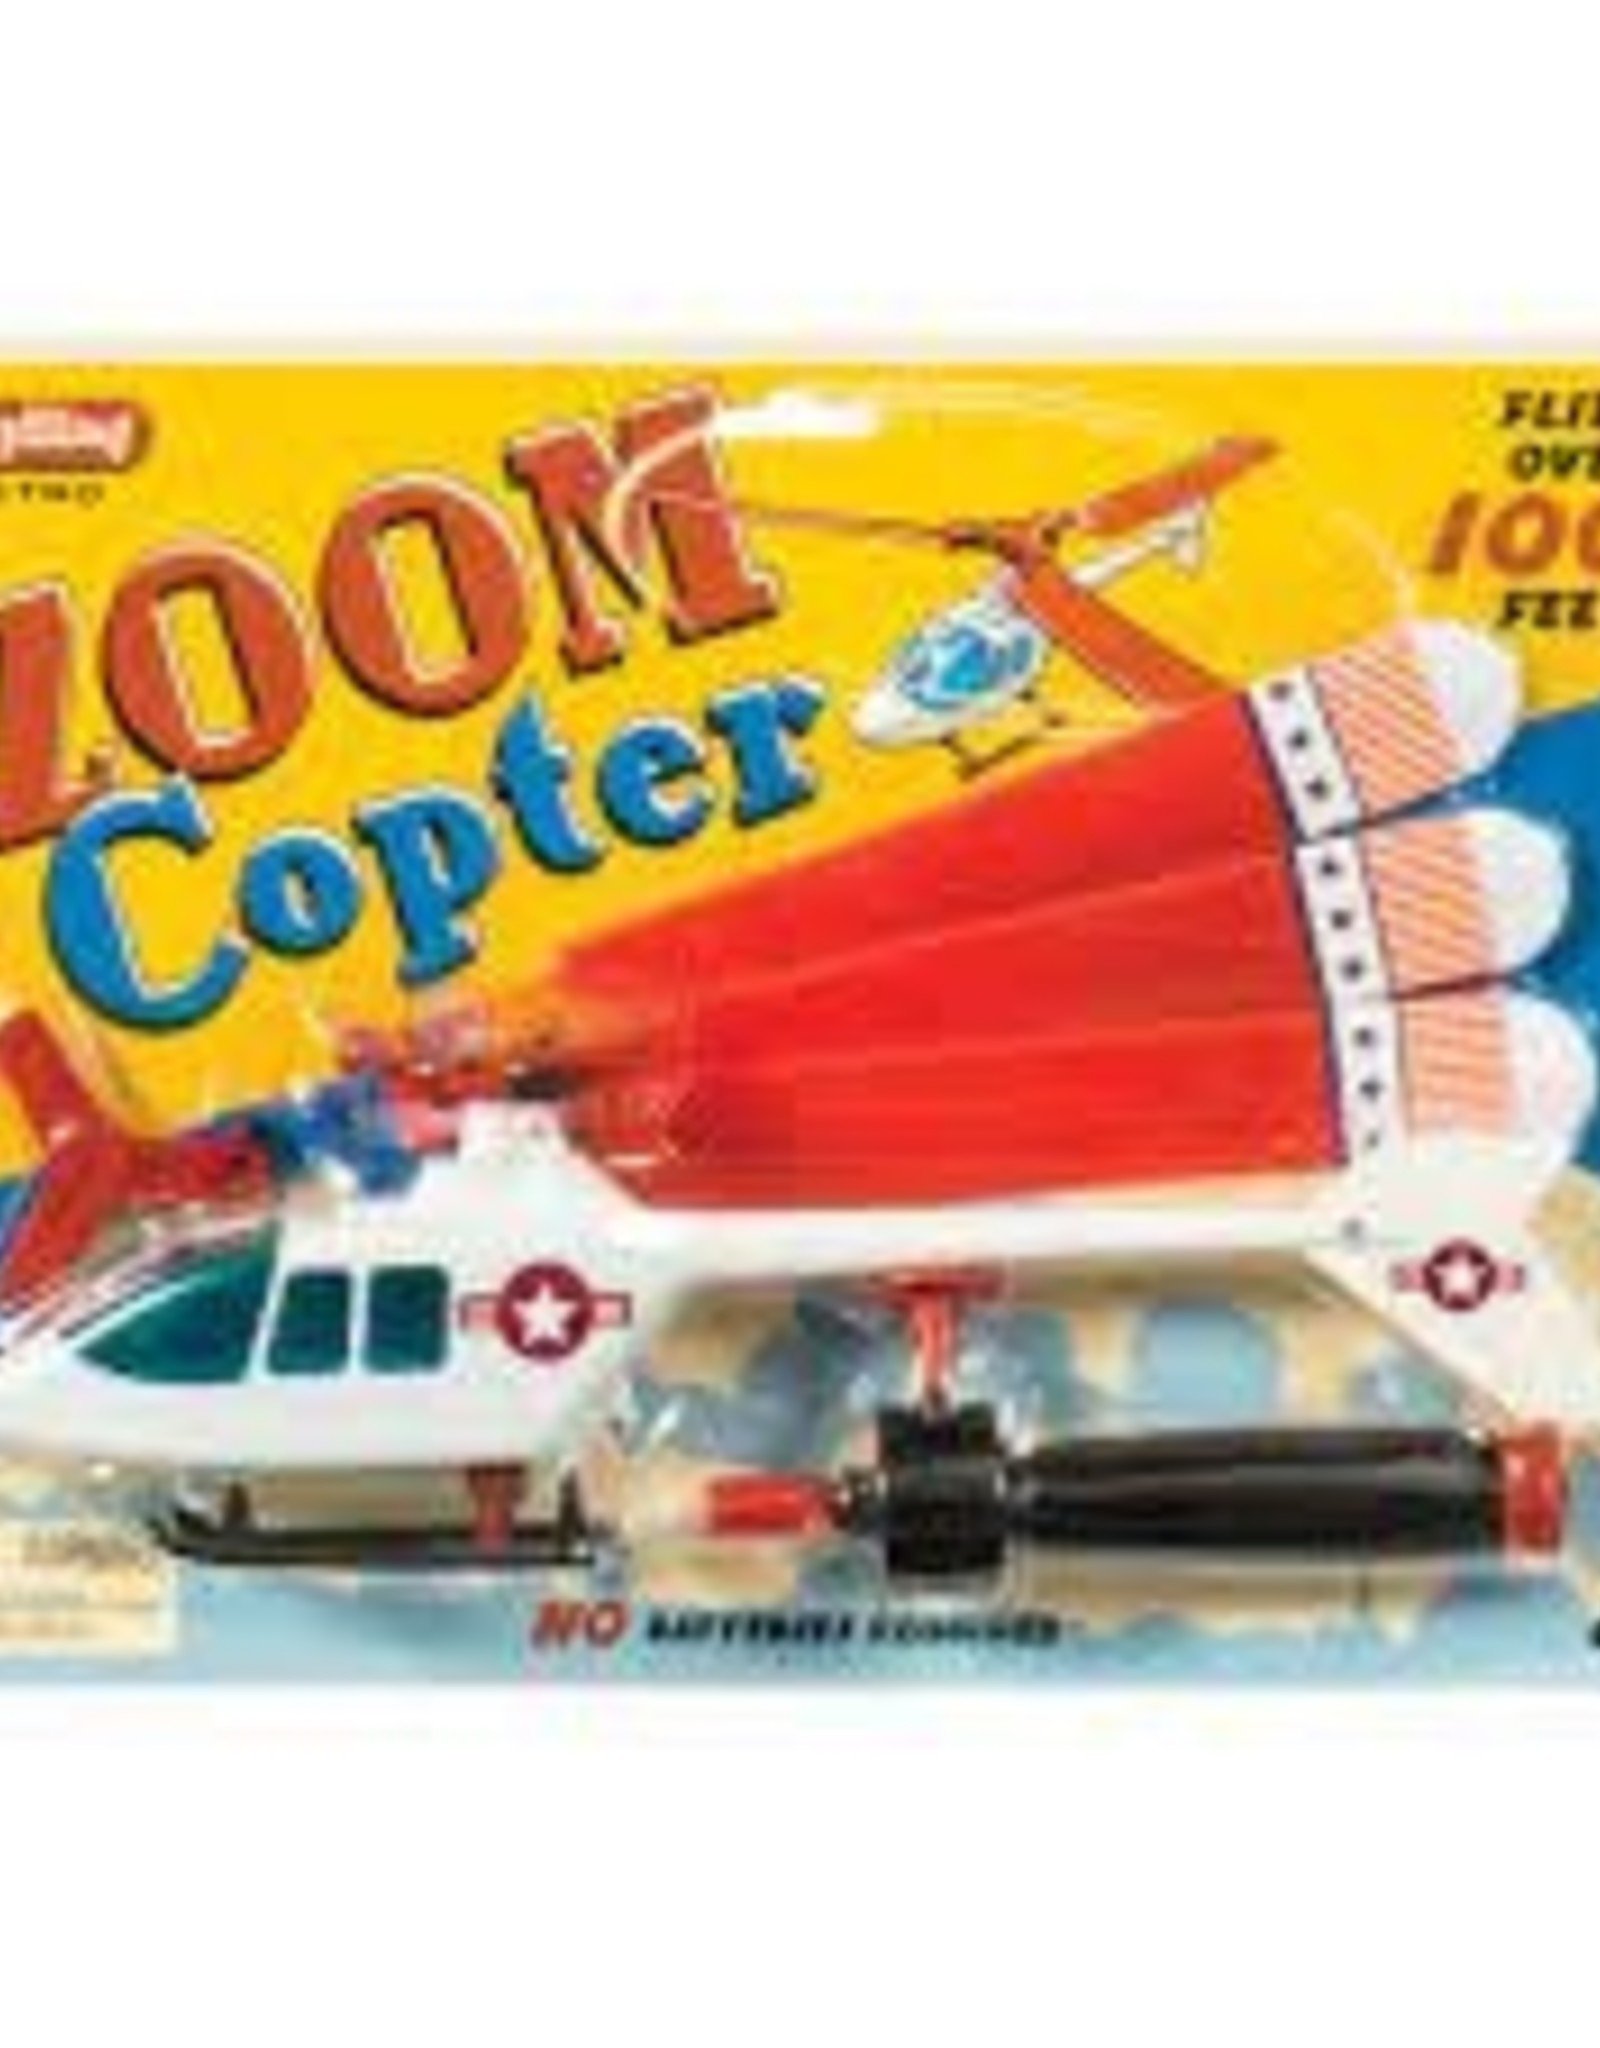 Schylling ZOOM COPTER